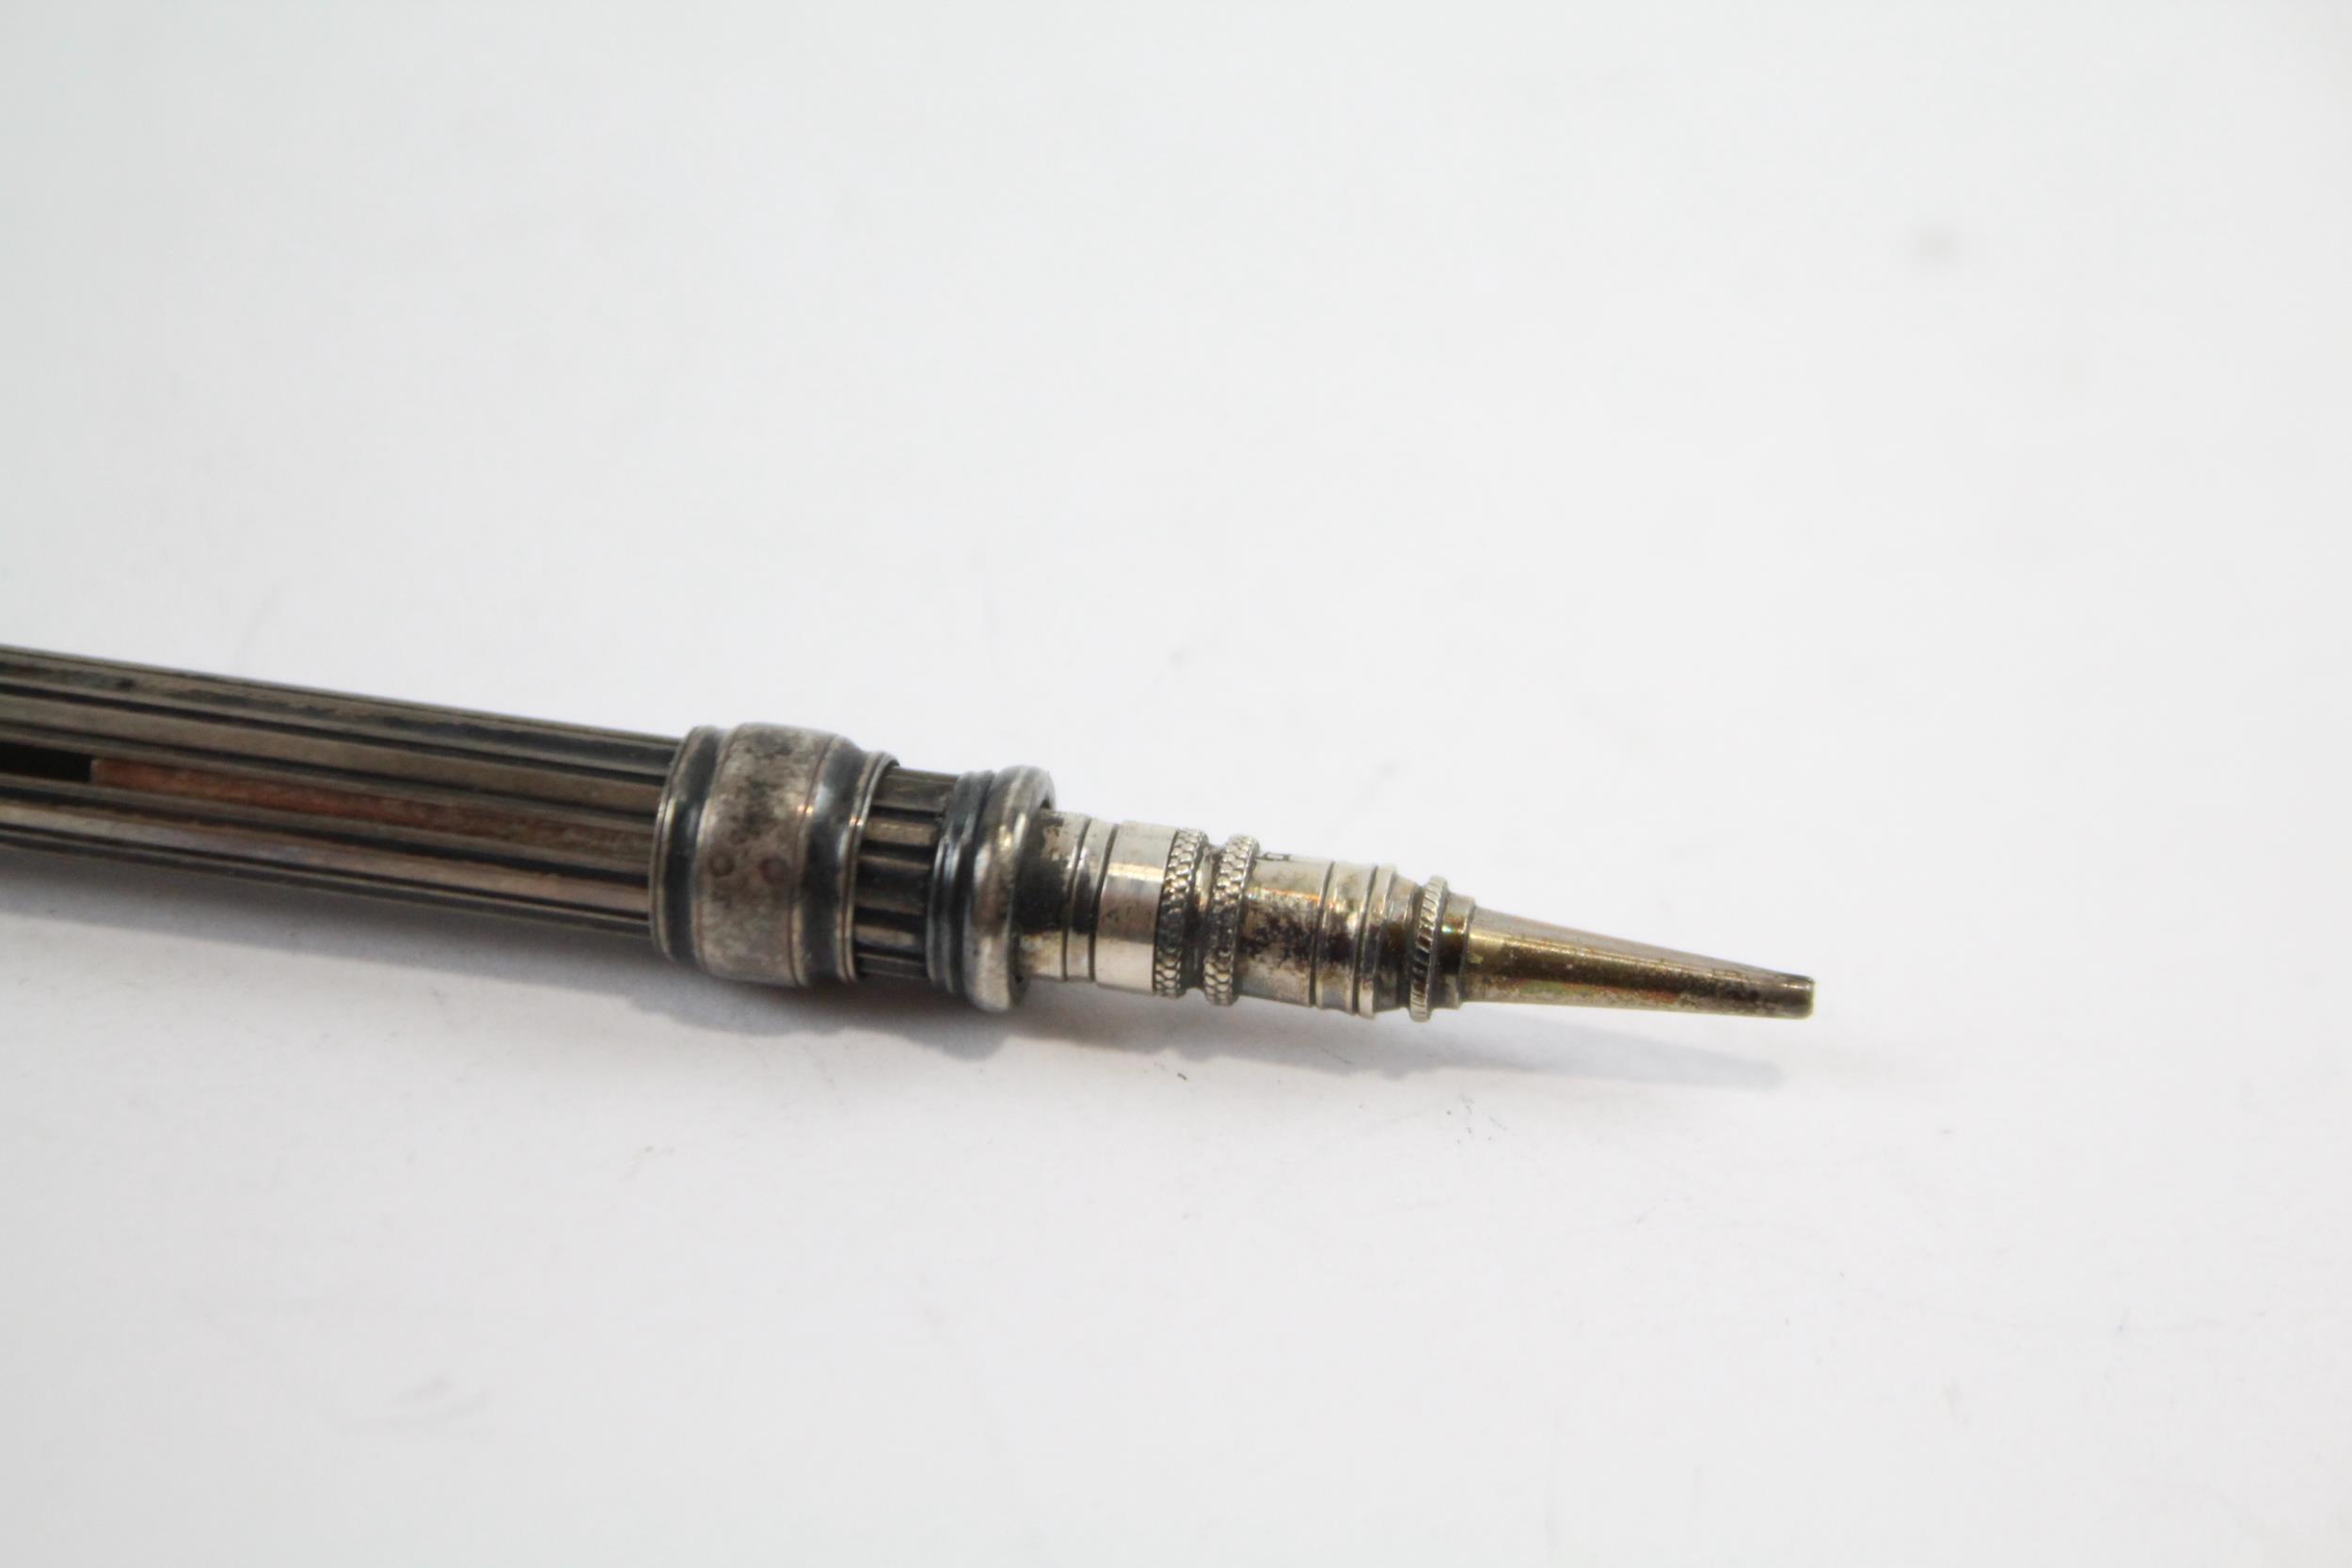 Antique / Vintage S Mordan & Co. .925 Sterling Silver Propelling Pencil (13g) // XRF TESTED FOR - Image 7 of 9